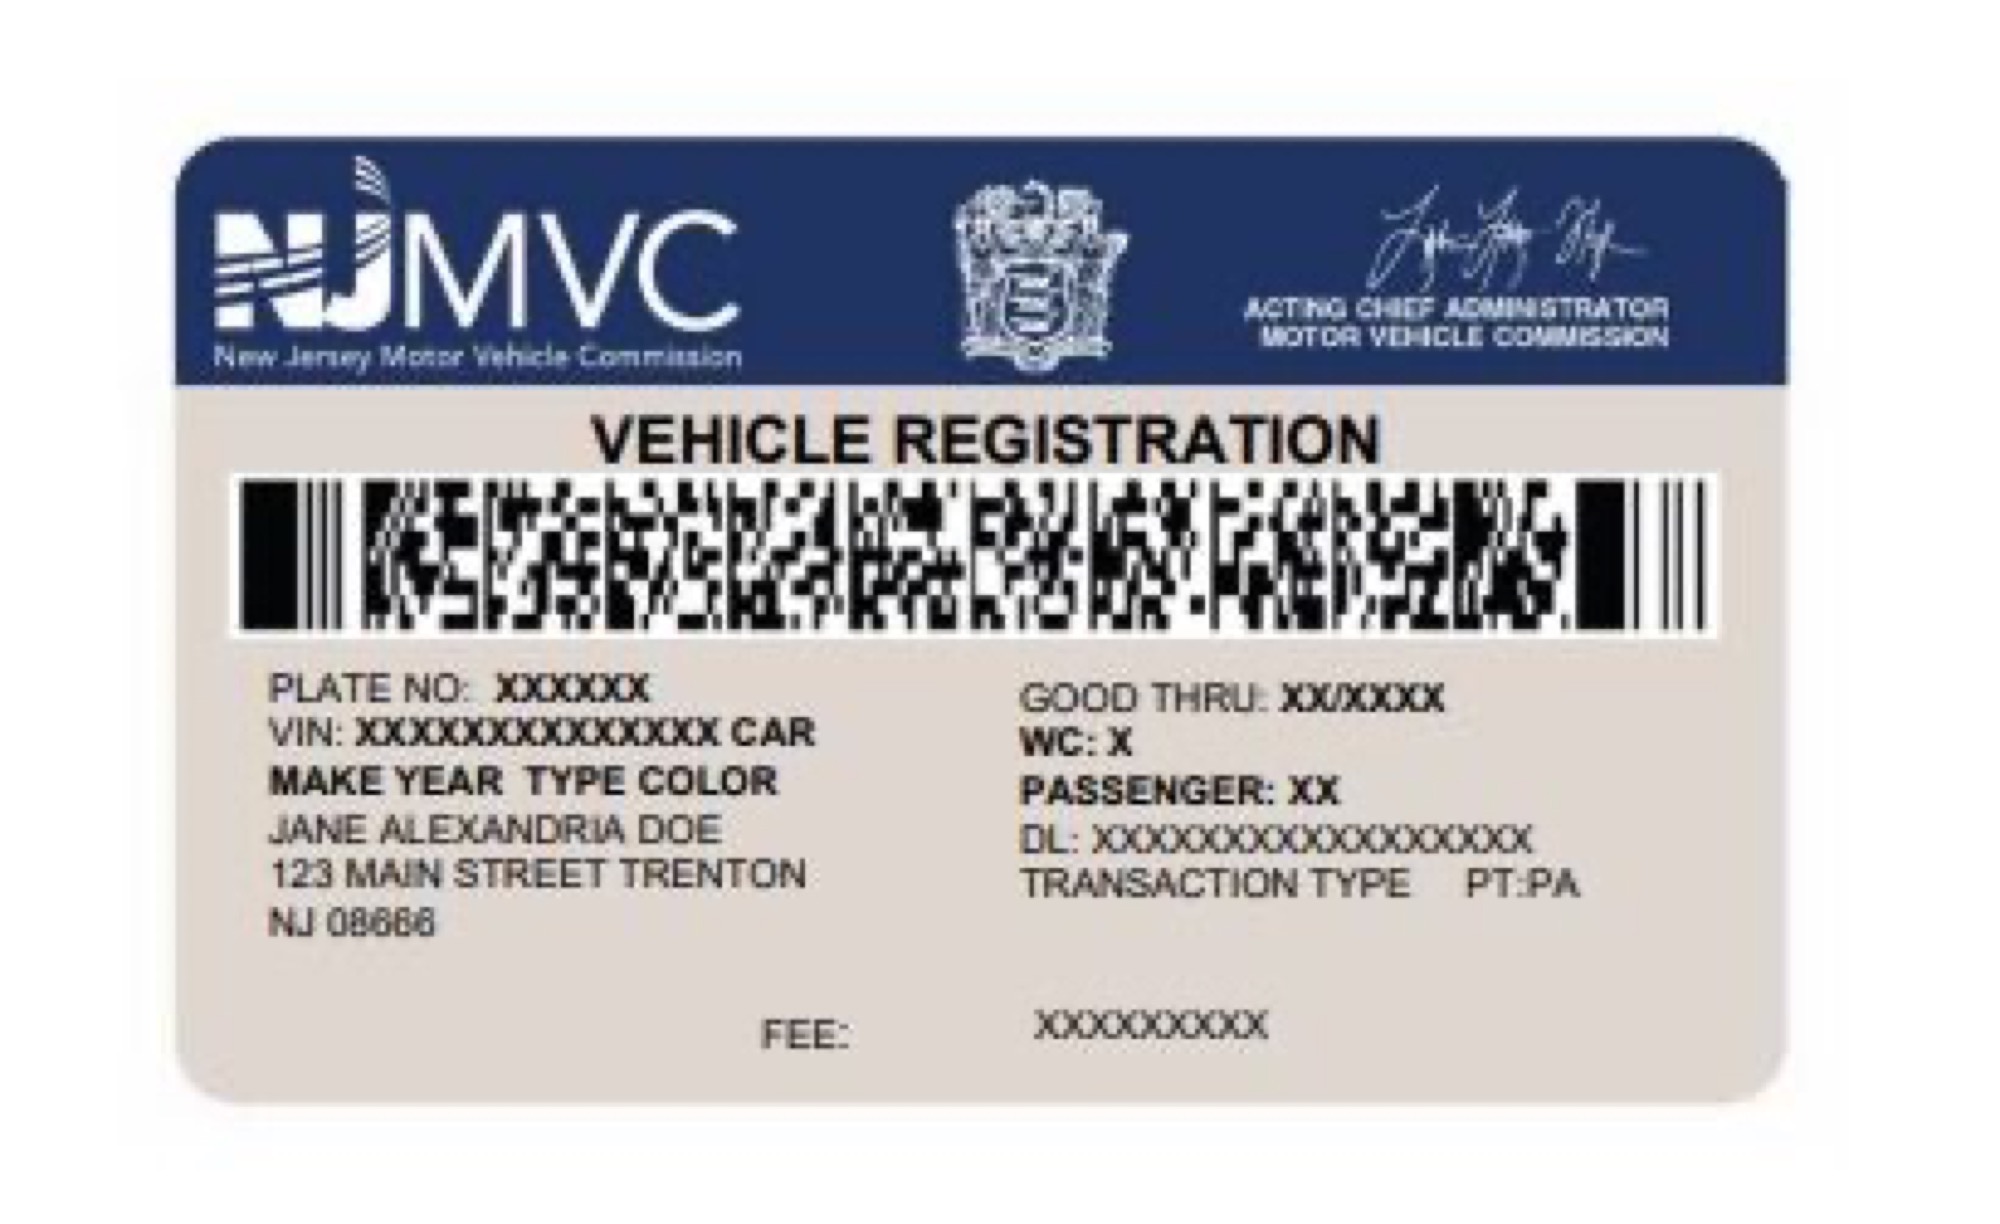 Registry of Motor Vehicles Announces Pre-Registration Available